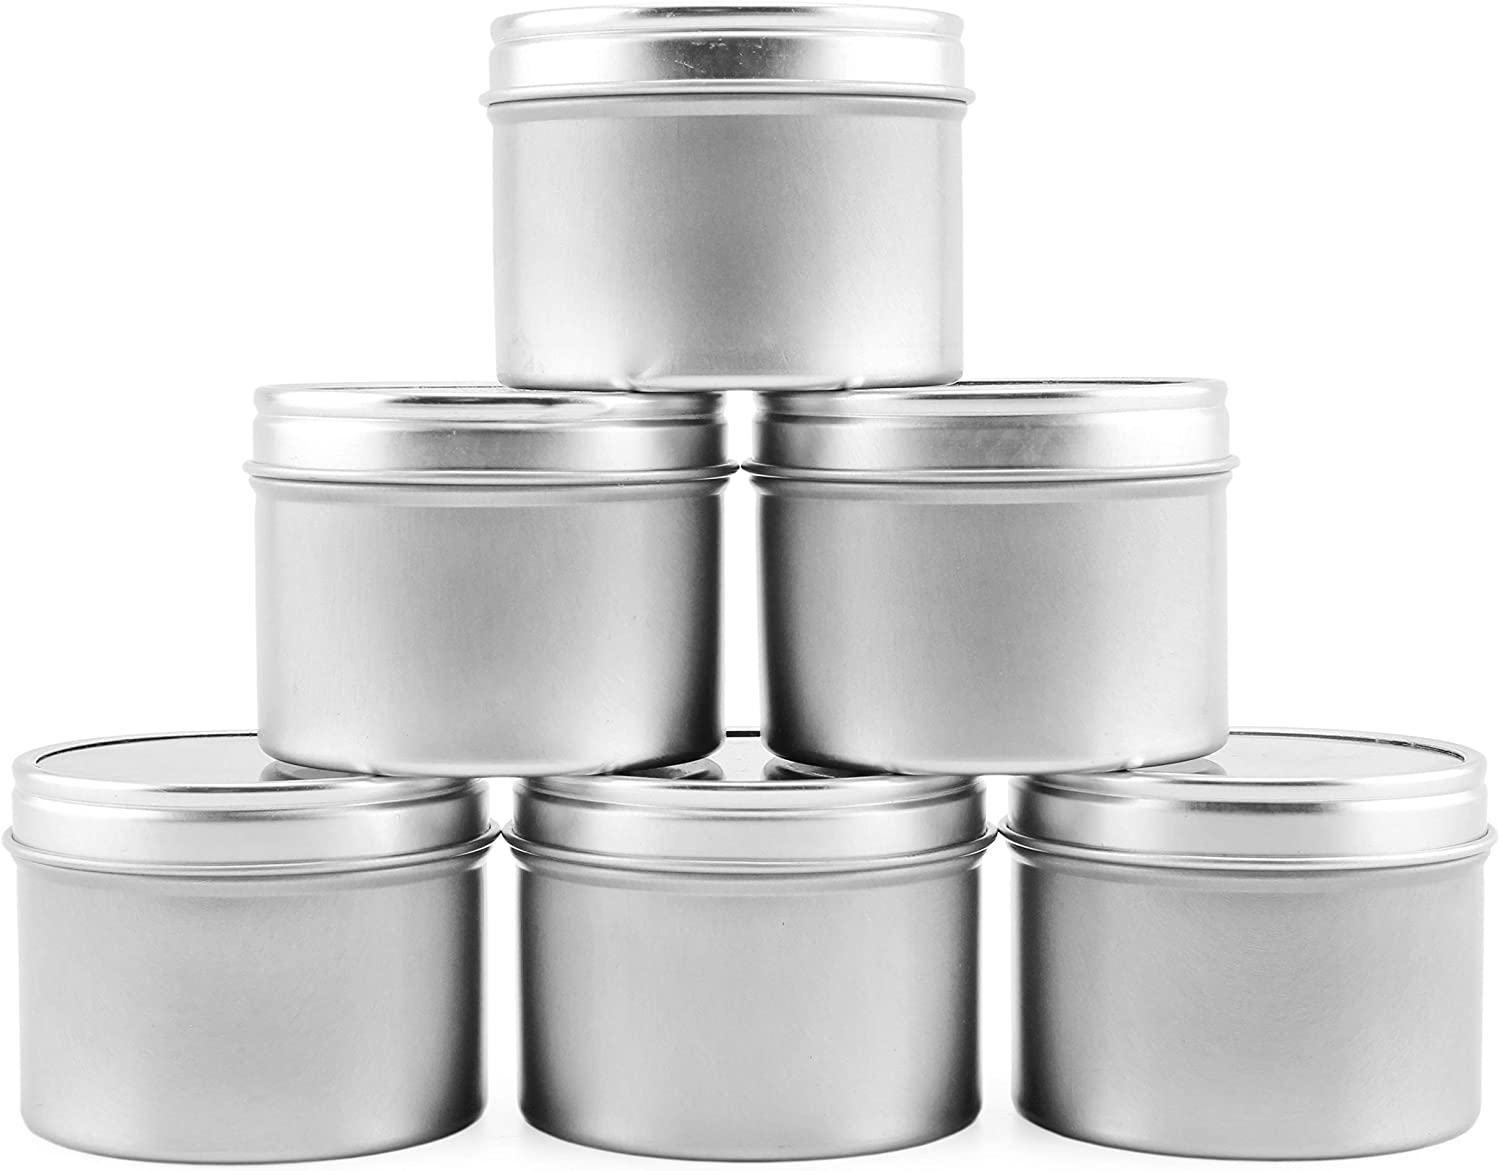 6-Ounce Round Gold Tins / Candle Tins (12-Pack), Metal Tins for Candles, DIY, Party Favors & More, Slip-On Lids Included